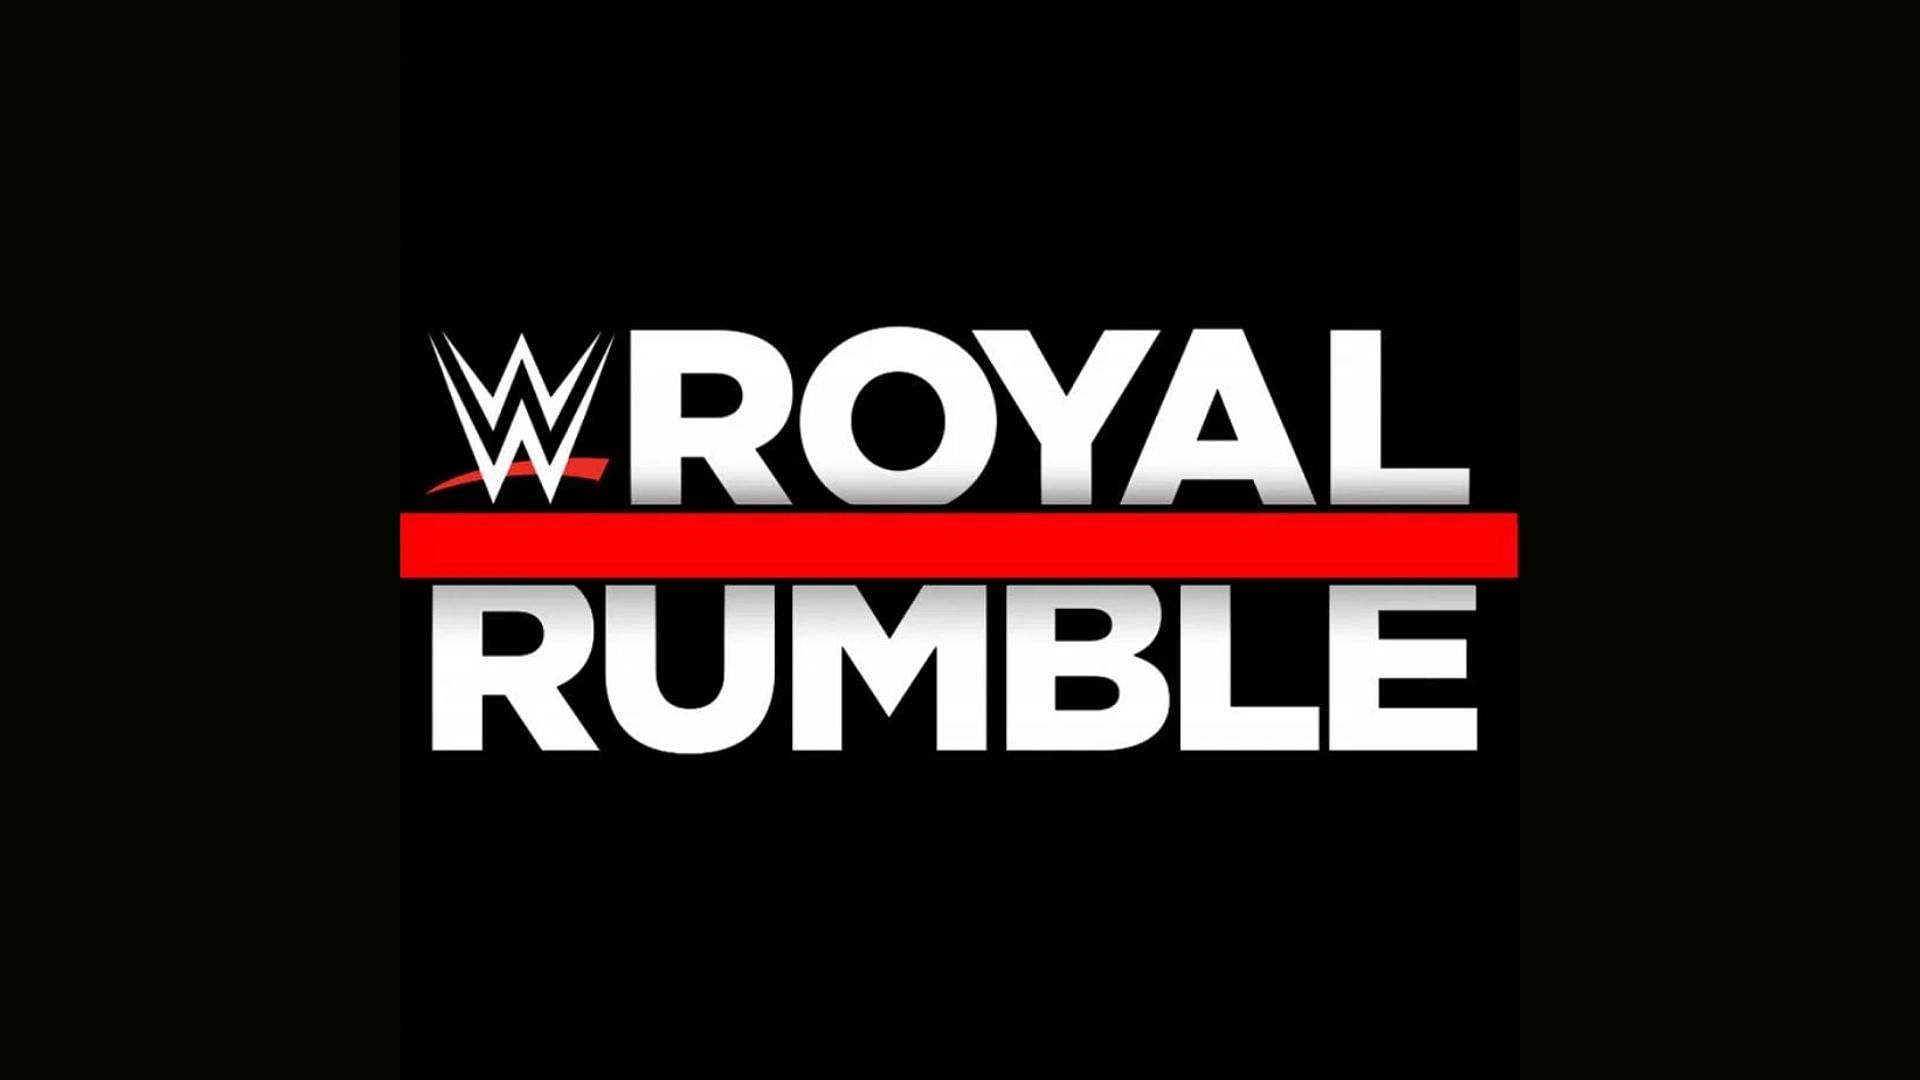 The 2023 Royal Rumble is WWE